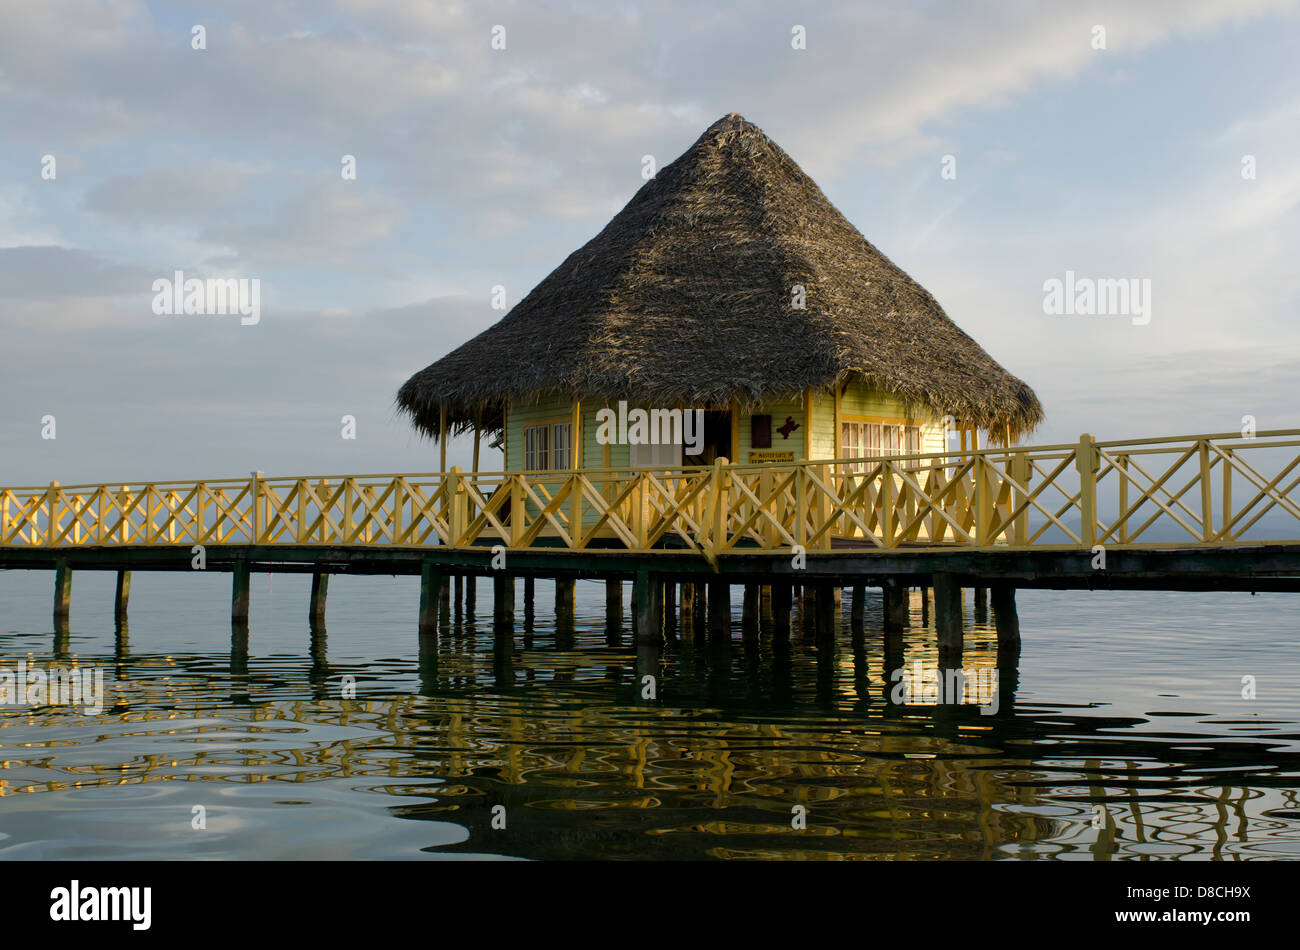 Thatch roofed bungalow on stilts in lagoon at Punta Caracol Hotel Stock Photo